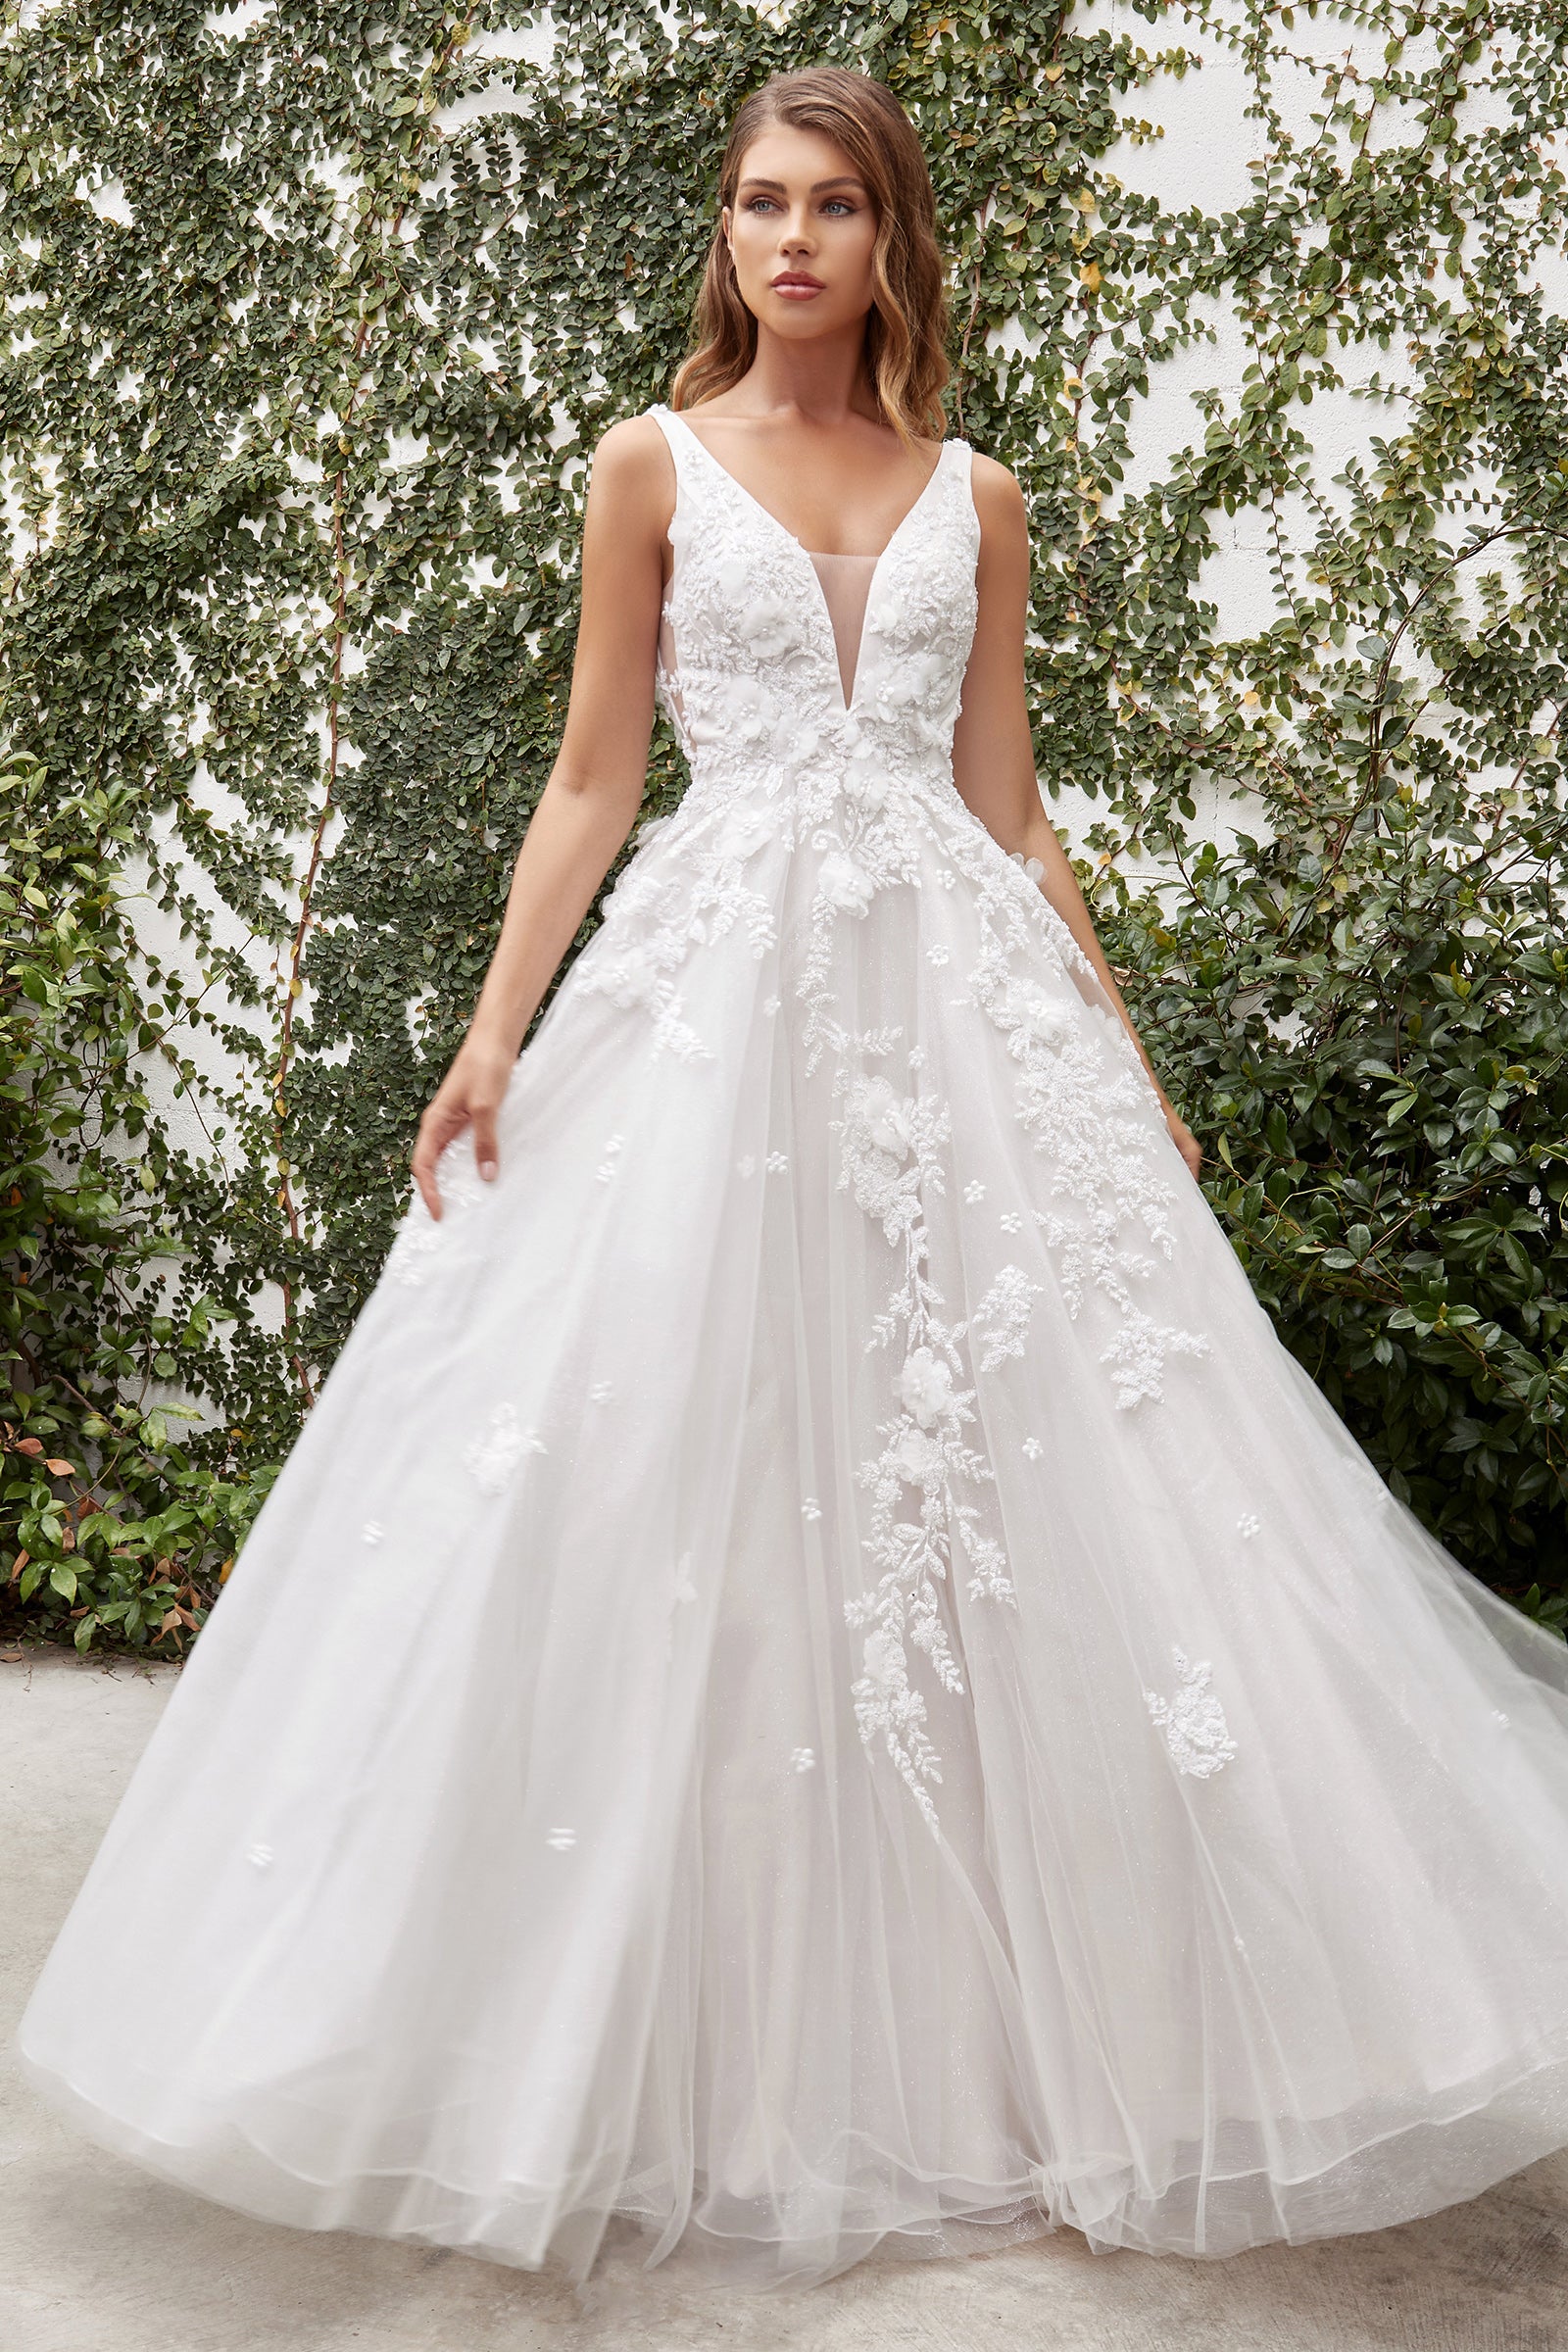 Galleria Gowns | Bridal Salons - The Knot